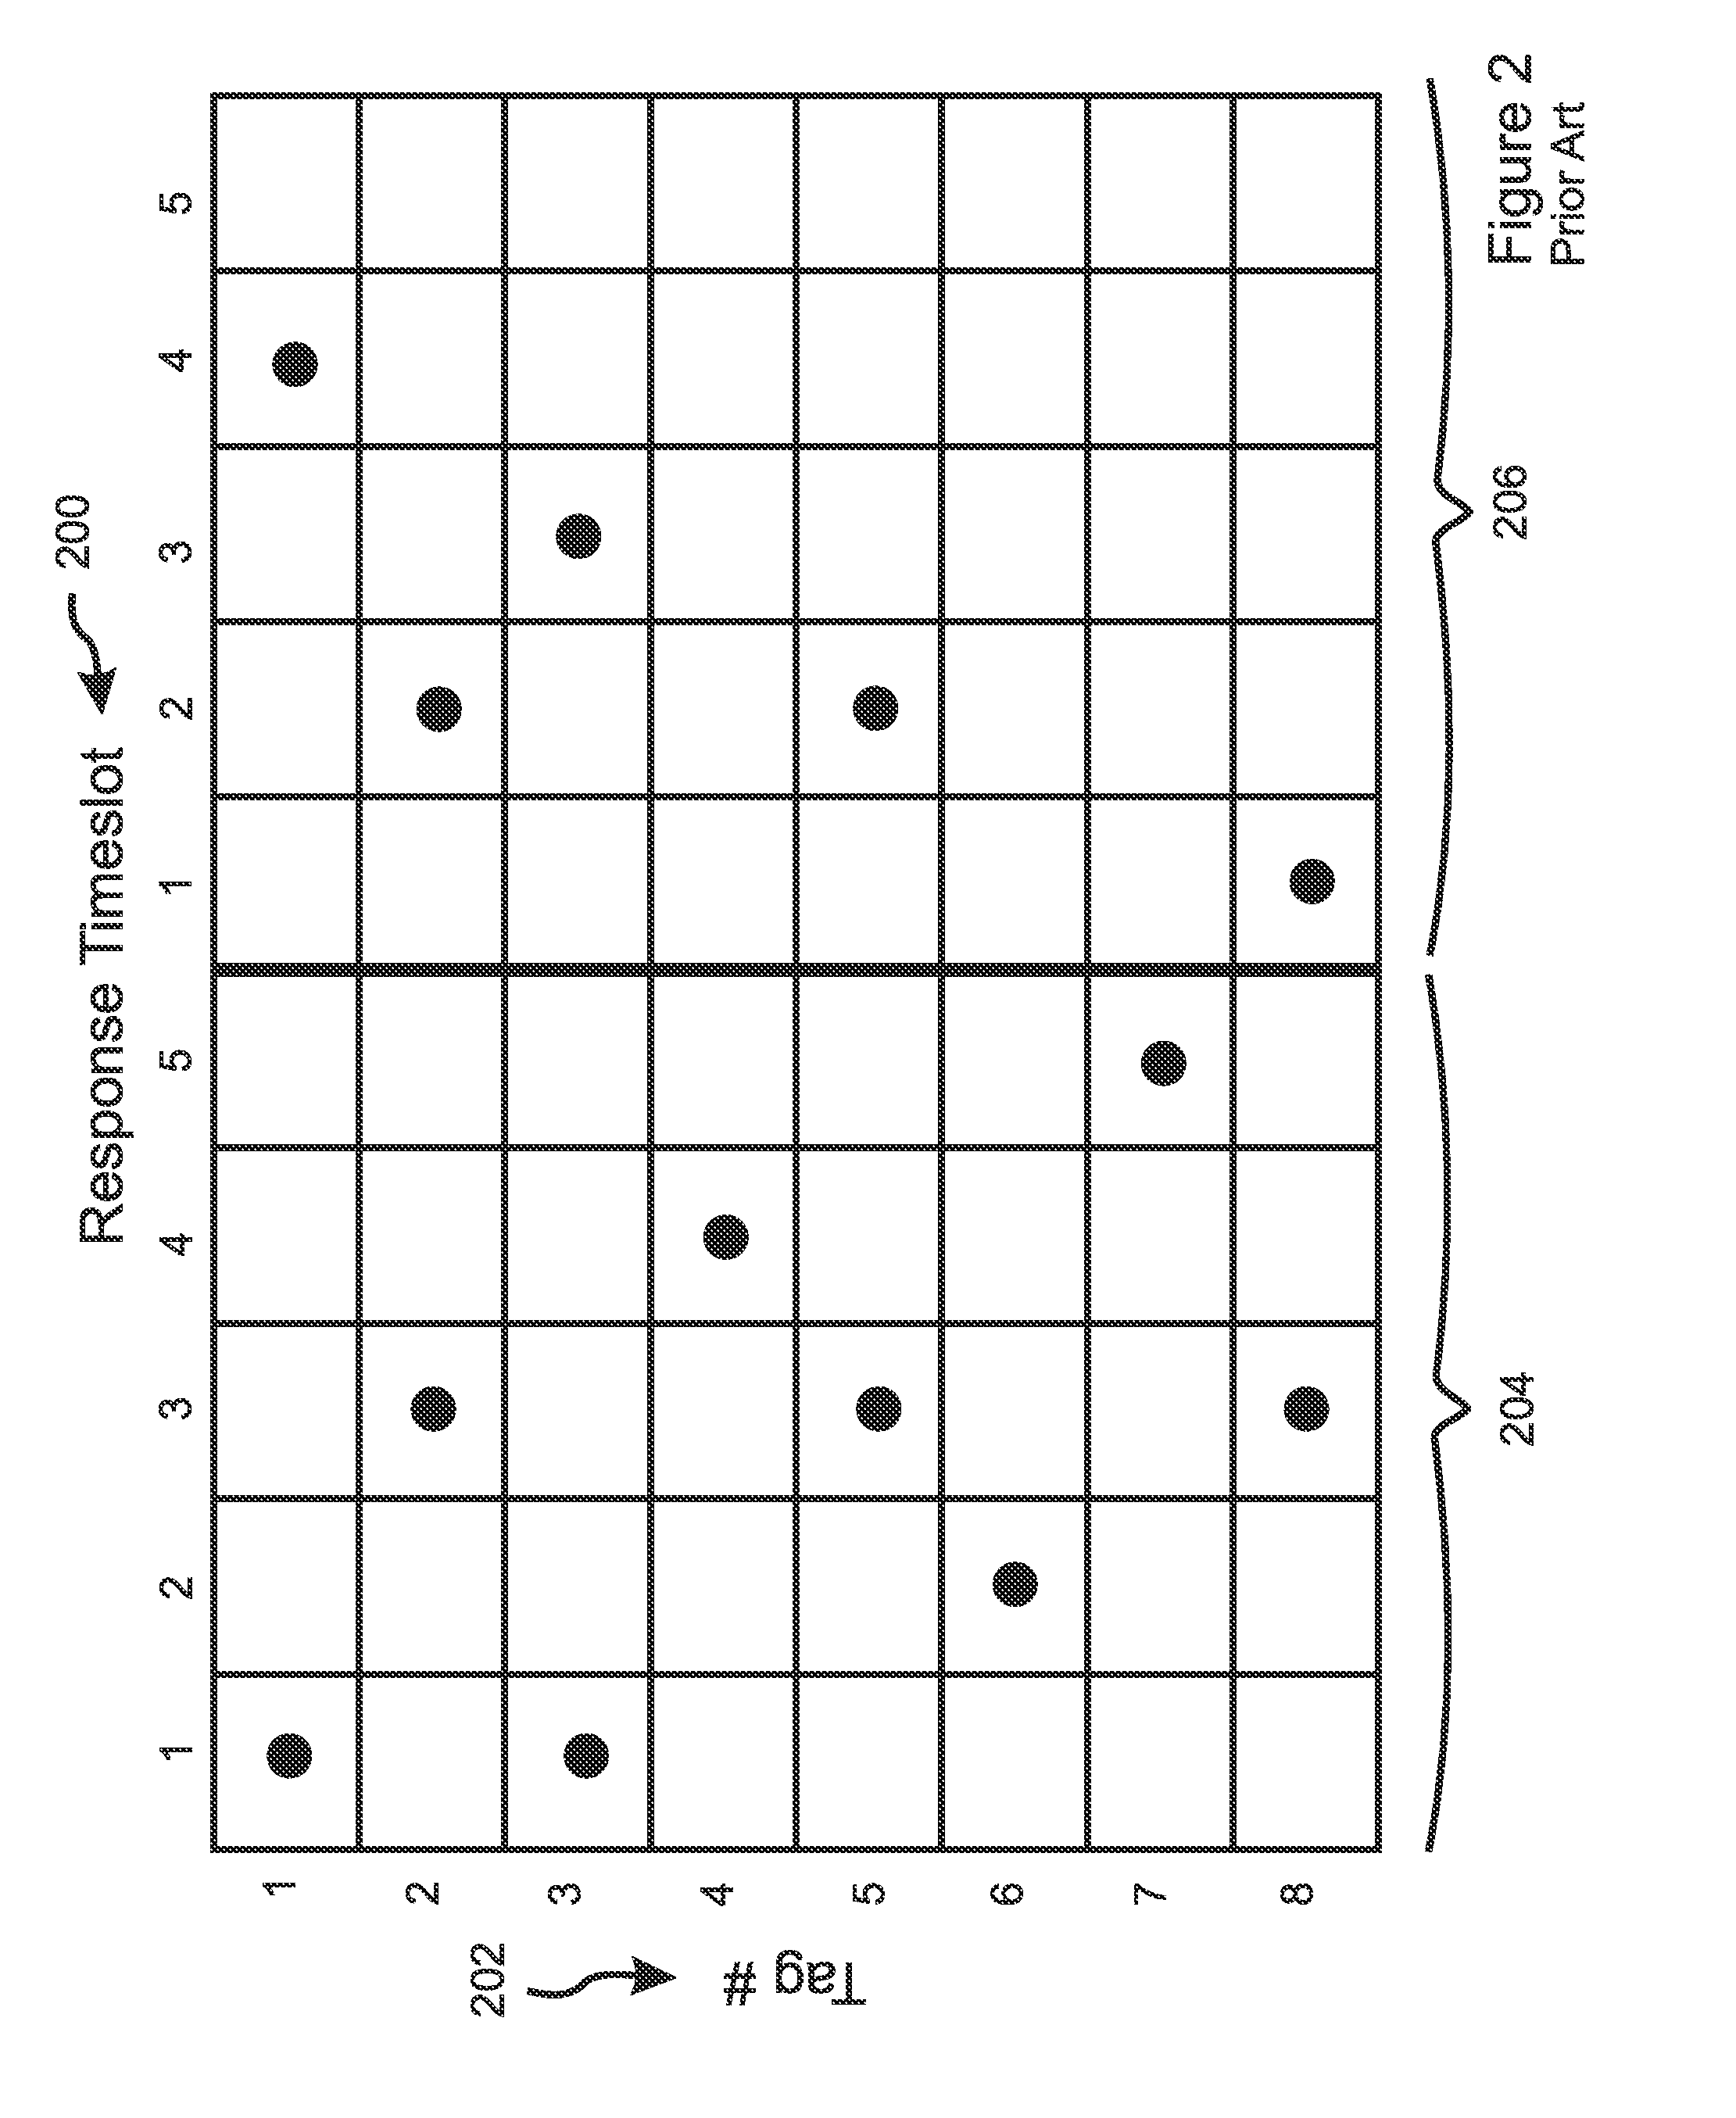 Method for simultaneous detection of a plurality of RFID tags using multiuser detection